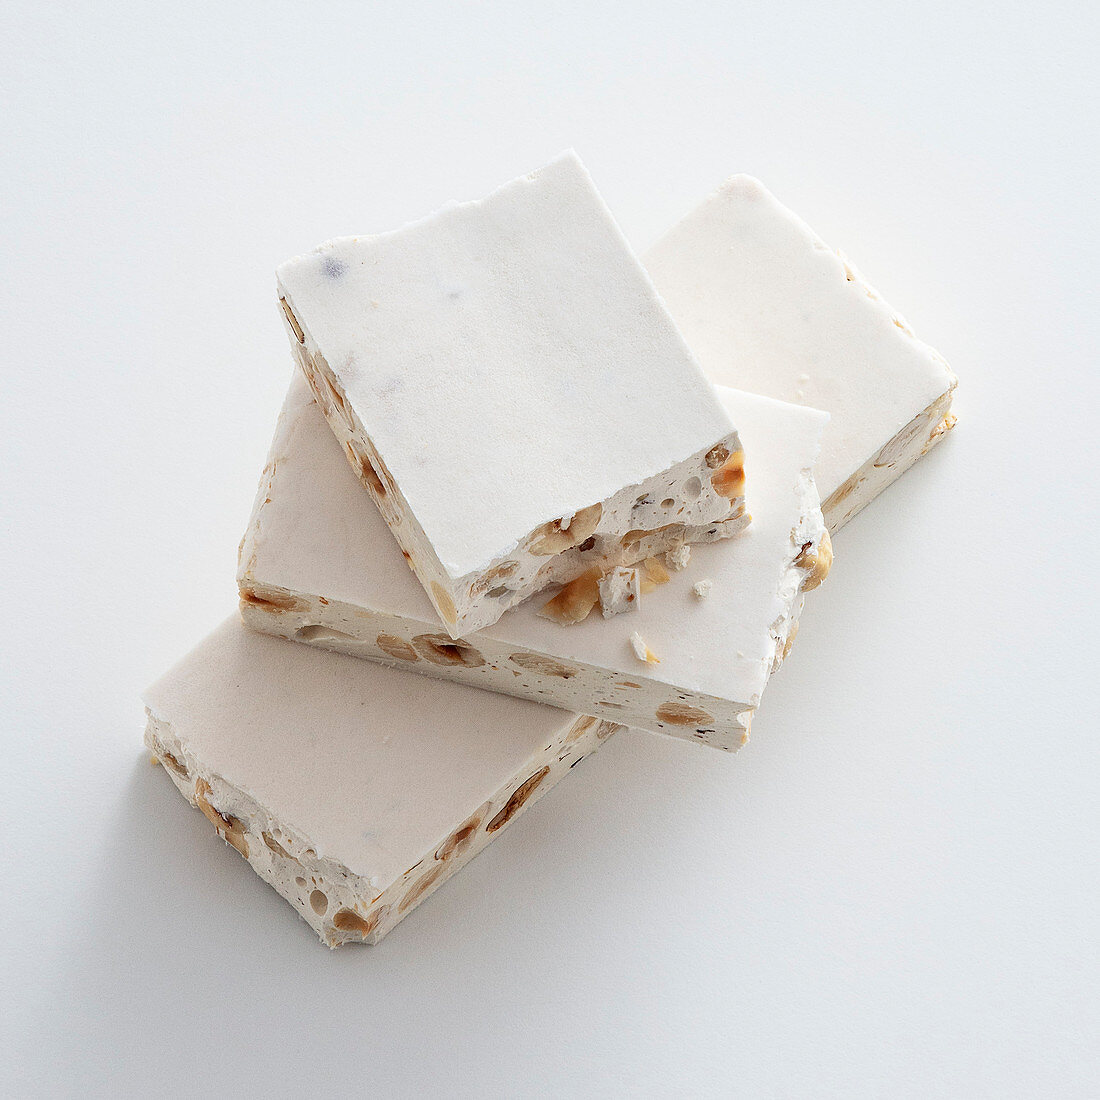 Torrone (white nougat with nuts, Italy)